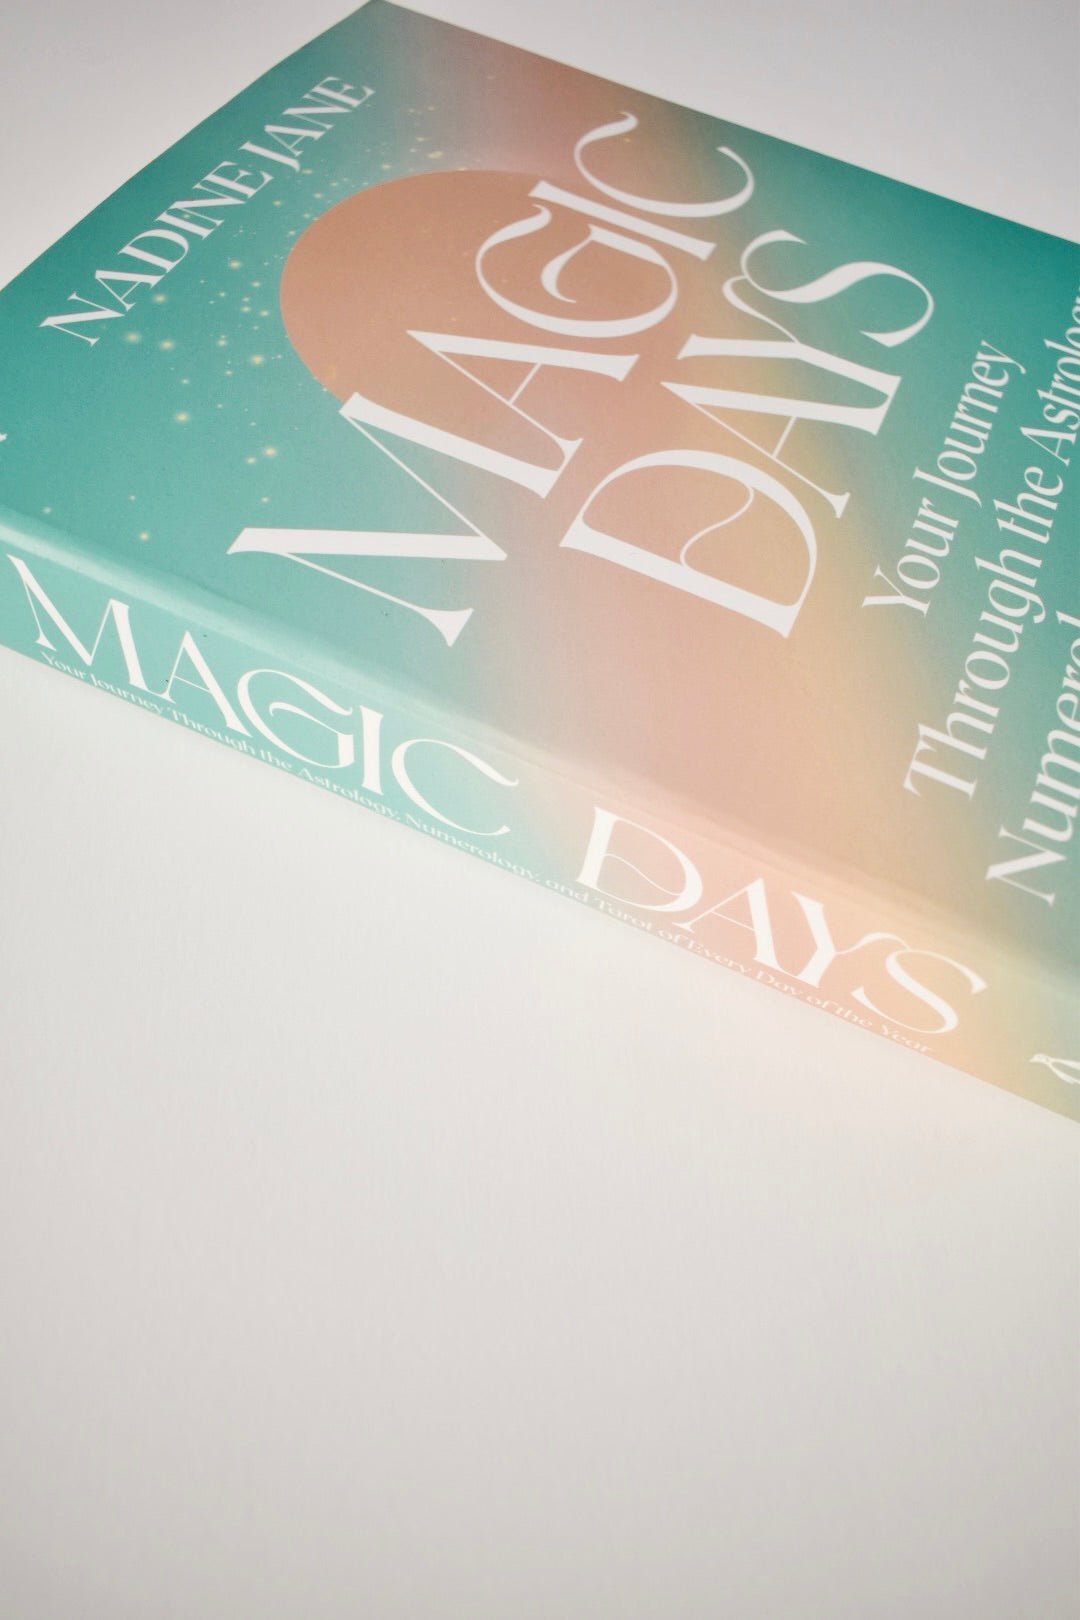 Magic Days | Astrology, Numerology, and Tarot for Every Day - Ardent Market - Nadine Jane